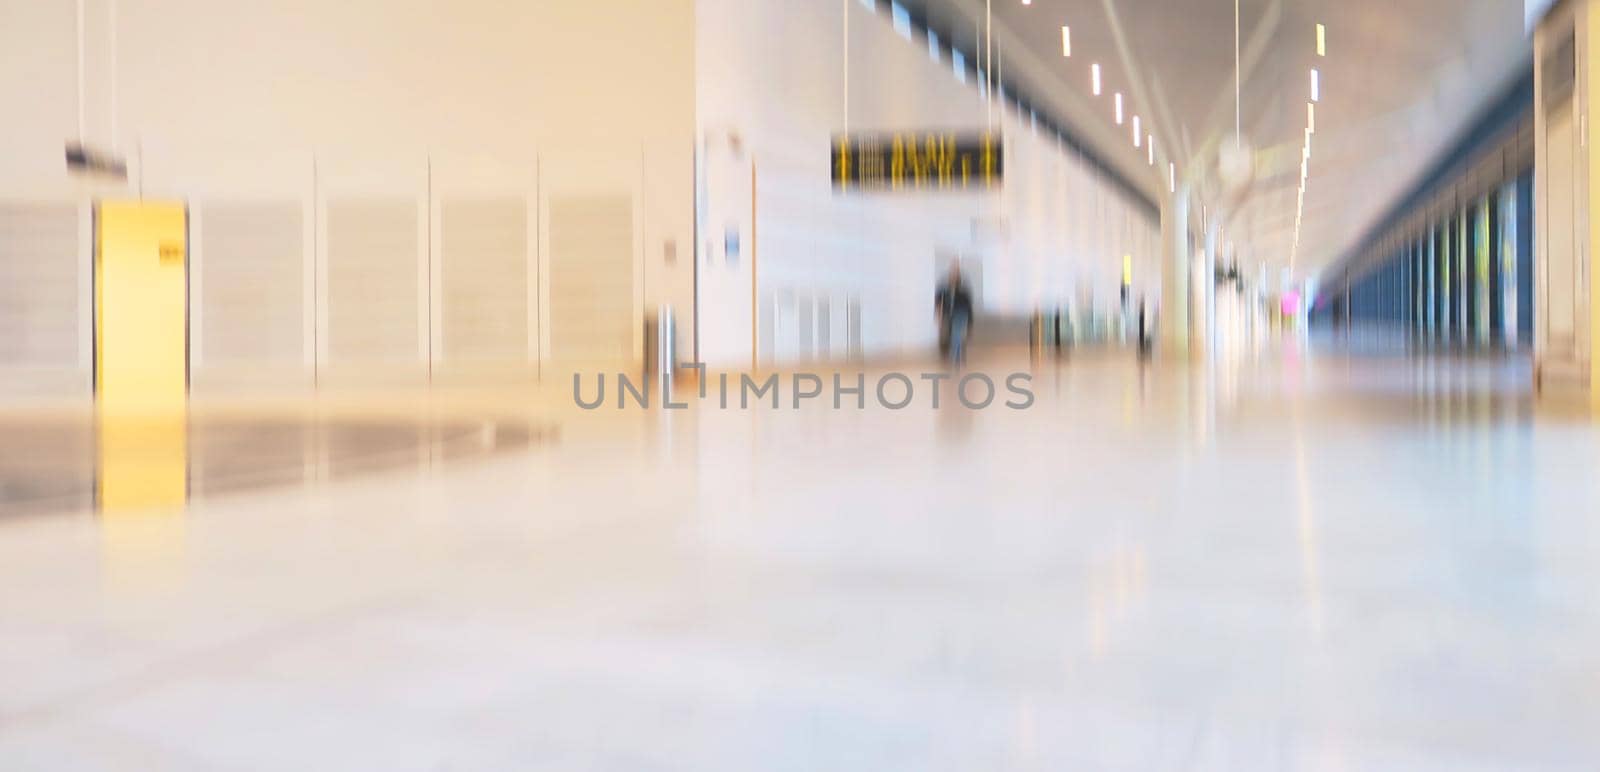 The the airport terminal - abstract architectural details.